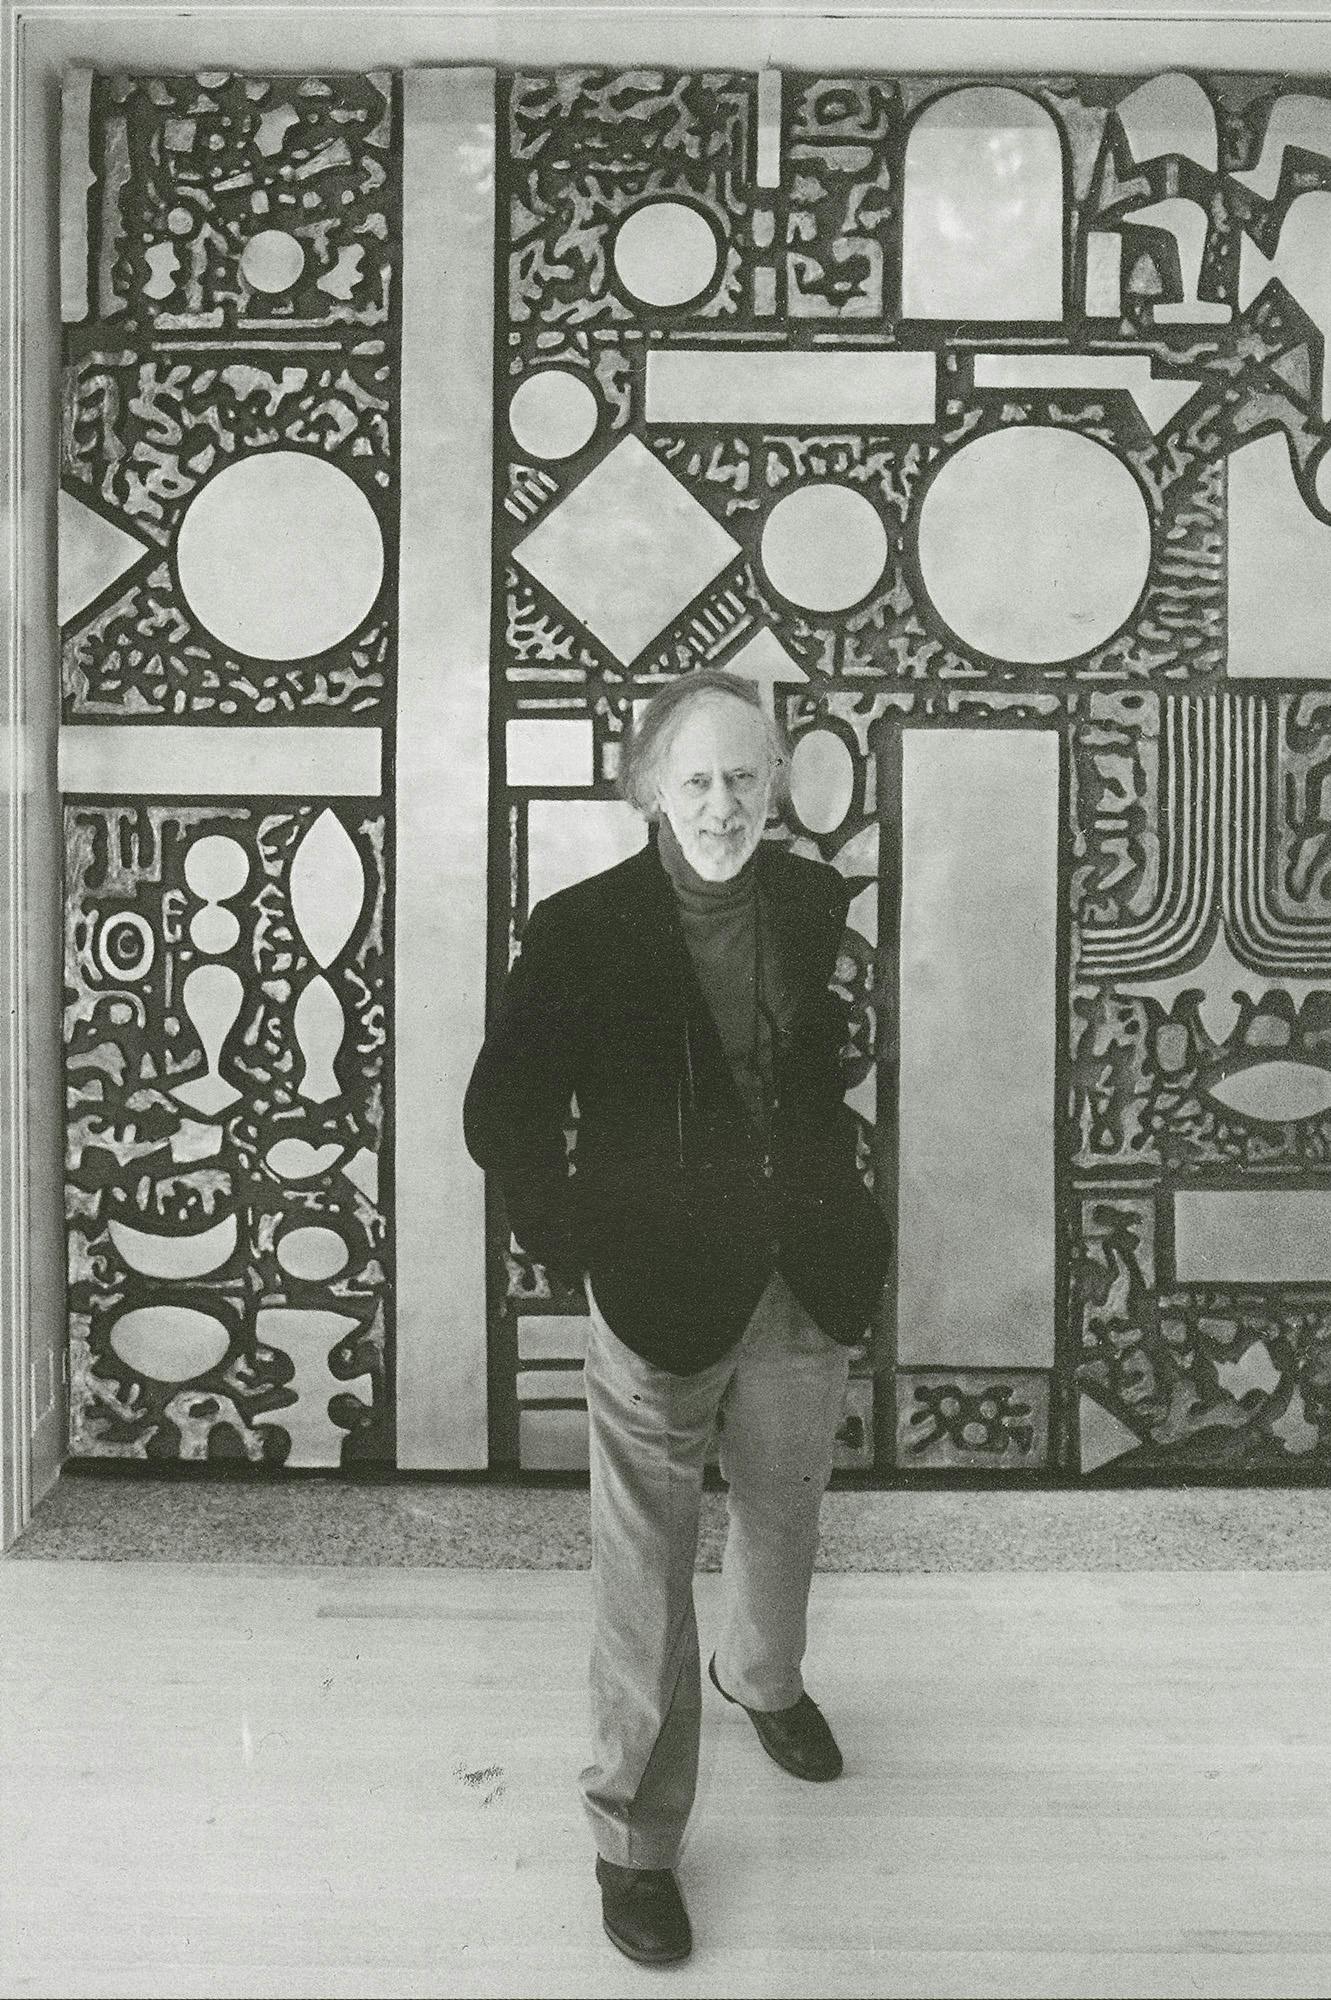 Richard Pousette-Dart with Cathedral, Indianapolis Museum of Art January 1991. – The Richard Pousette-Dart Foundation